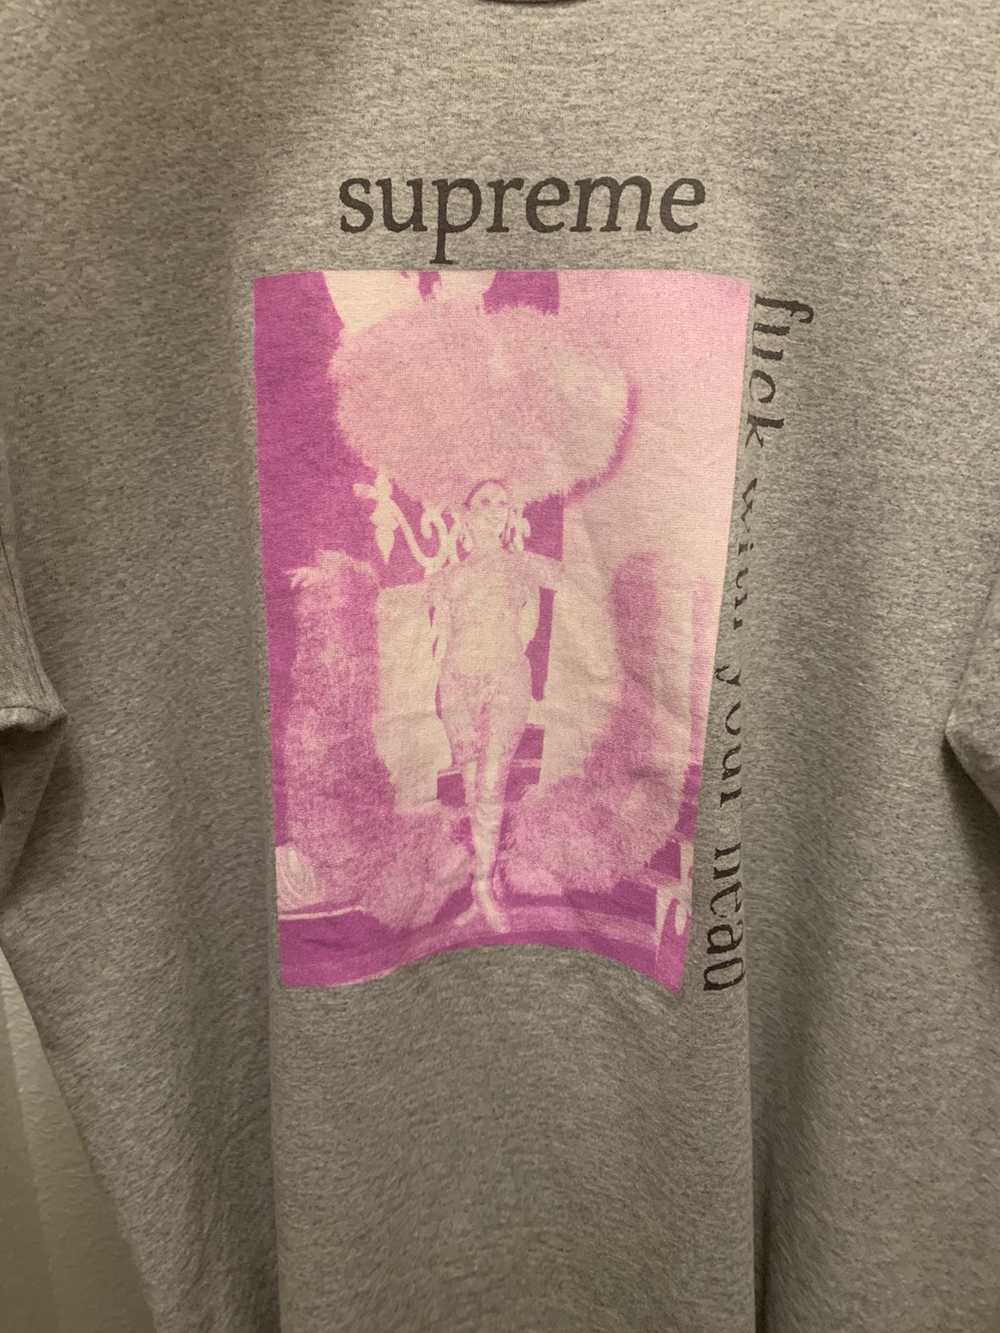 Supreme Fuck With Your Head Tee - image 3